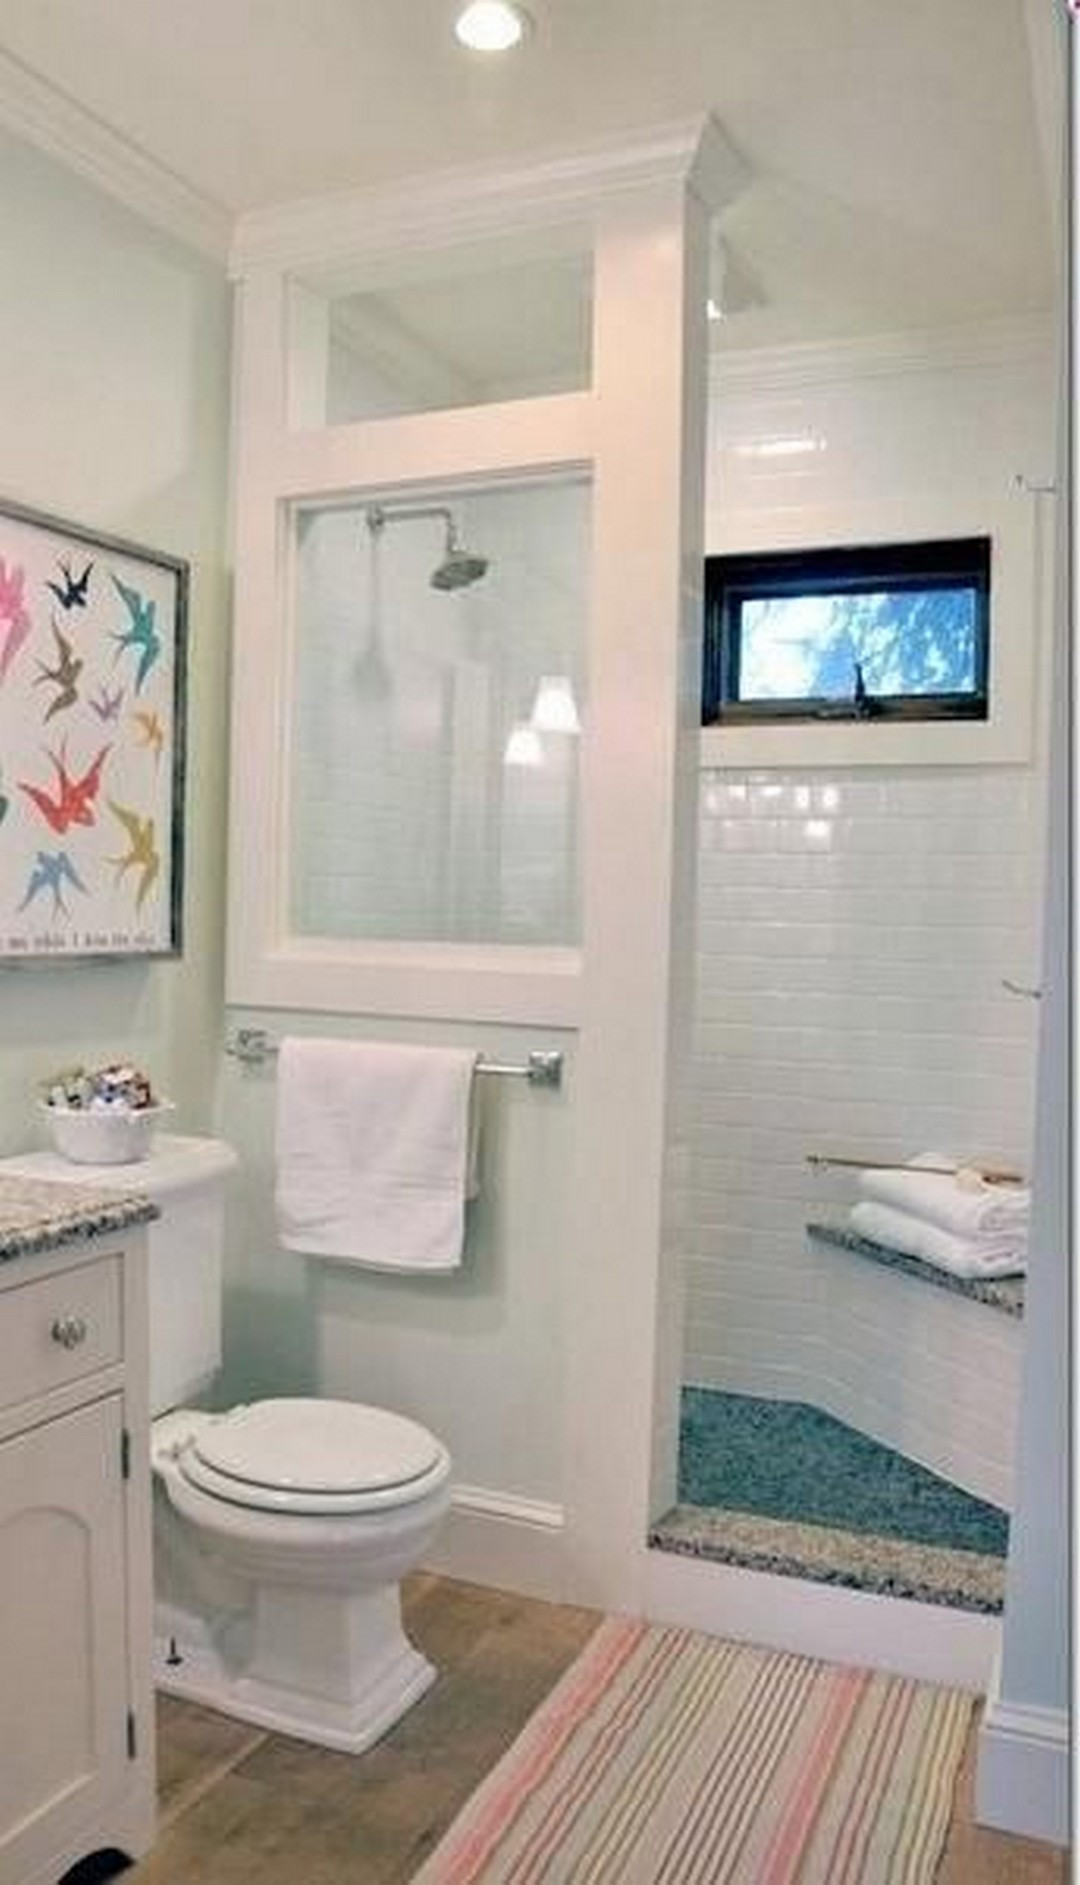 Small Bathroom Space Ideas
 How to Begin Bathroom Renovation for Small Spaces with The